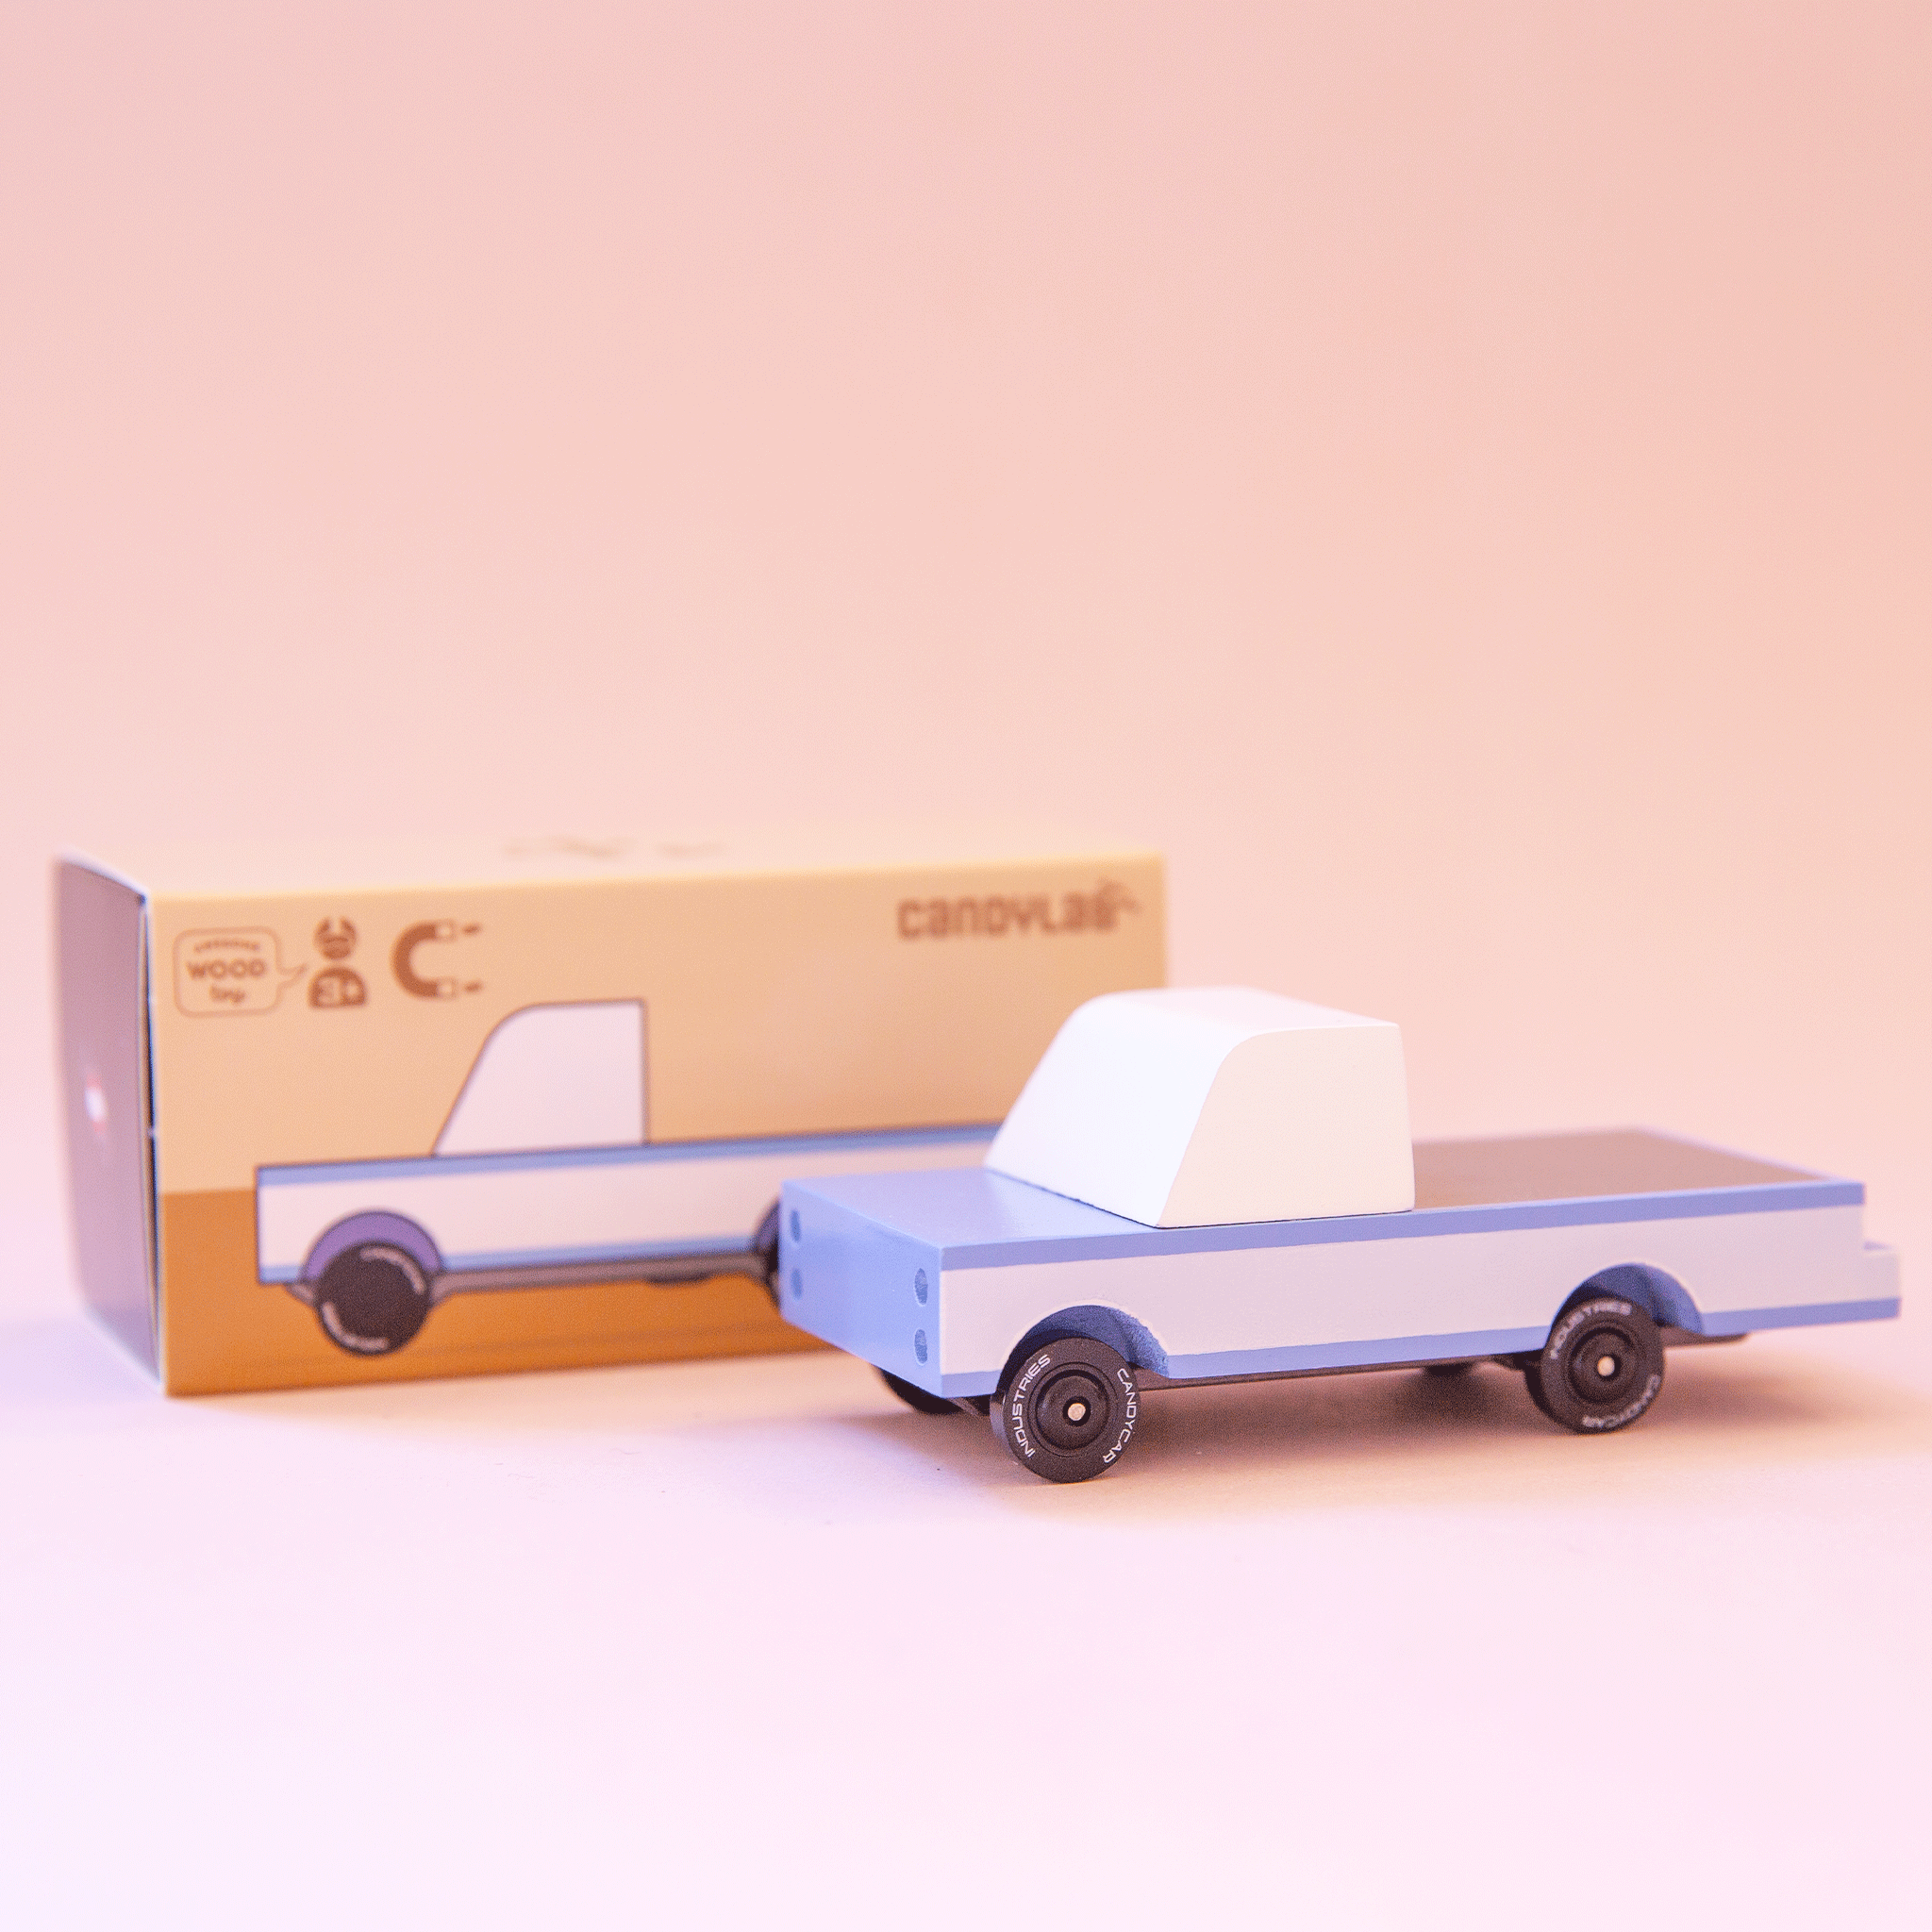 A blue wooden toy pickup truck on a peachy background in front of the box it comes in. 